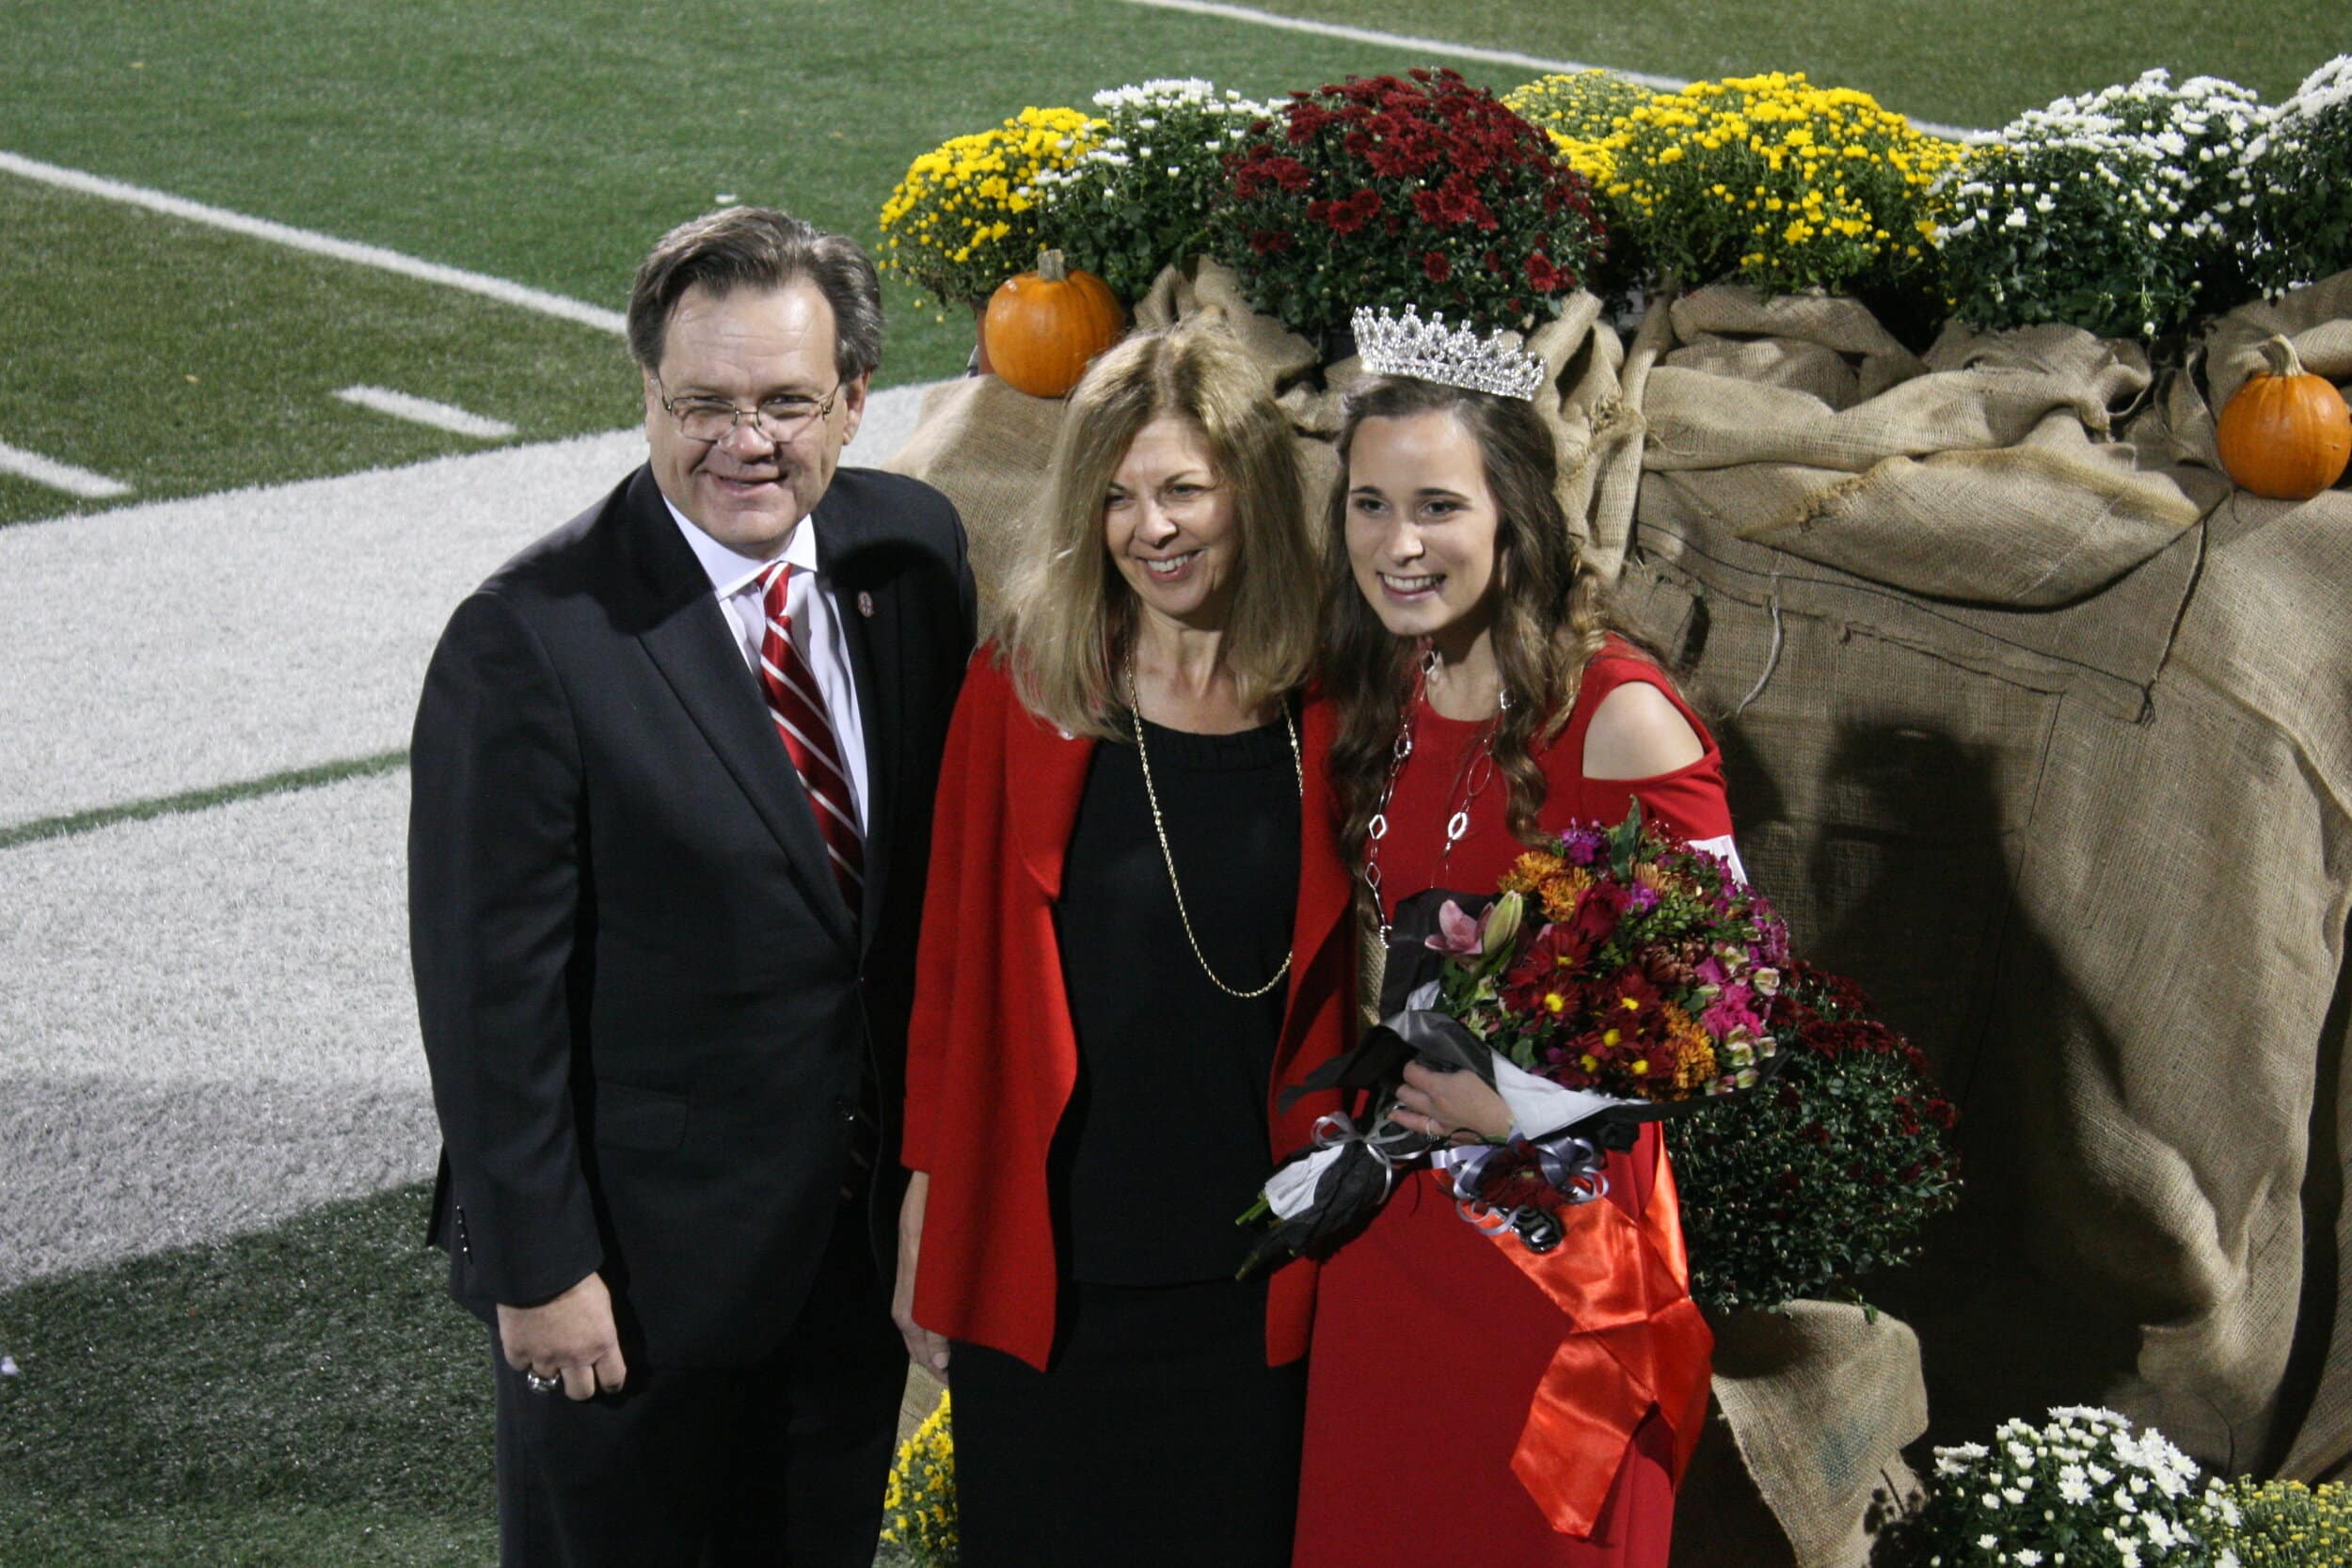 After being crowned NGU Homecoming Queen 2020, senior Lauren Hawthorne is congratulated by President Gene Fant and his wife.